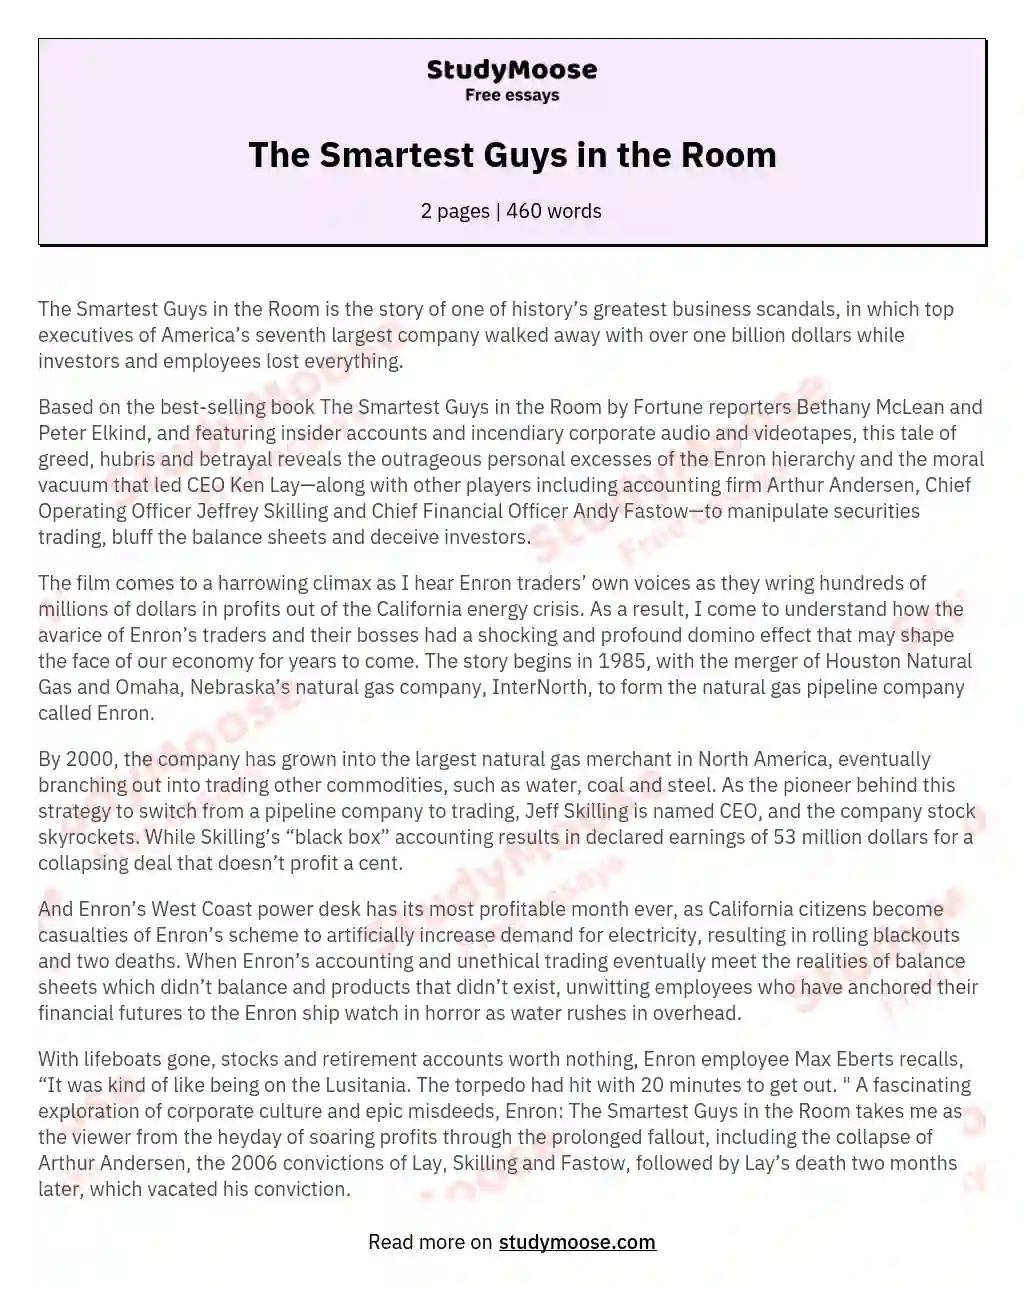 The Smartest Guys in the Room essay